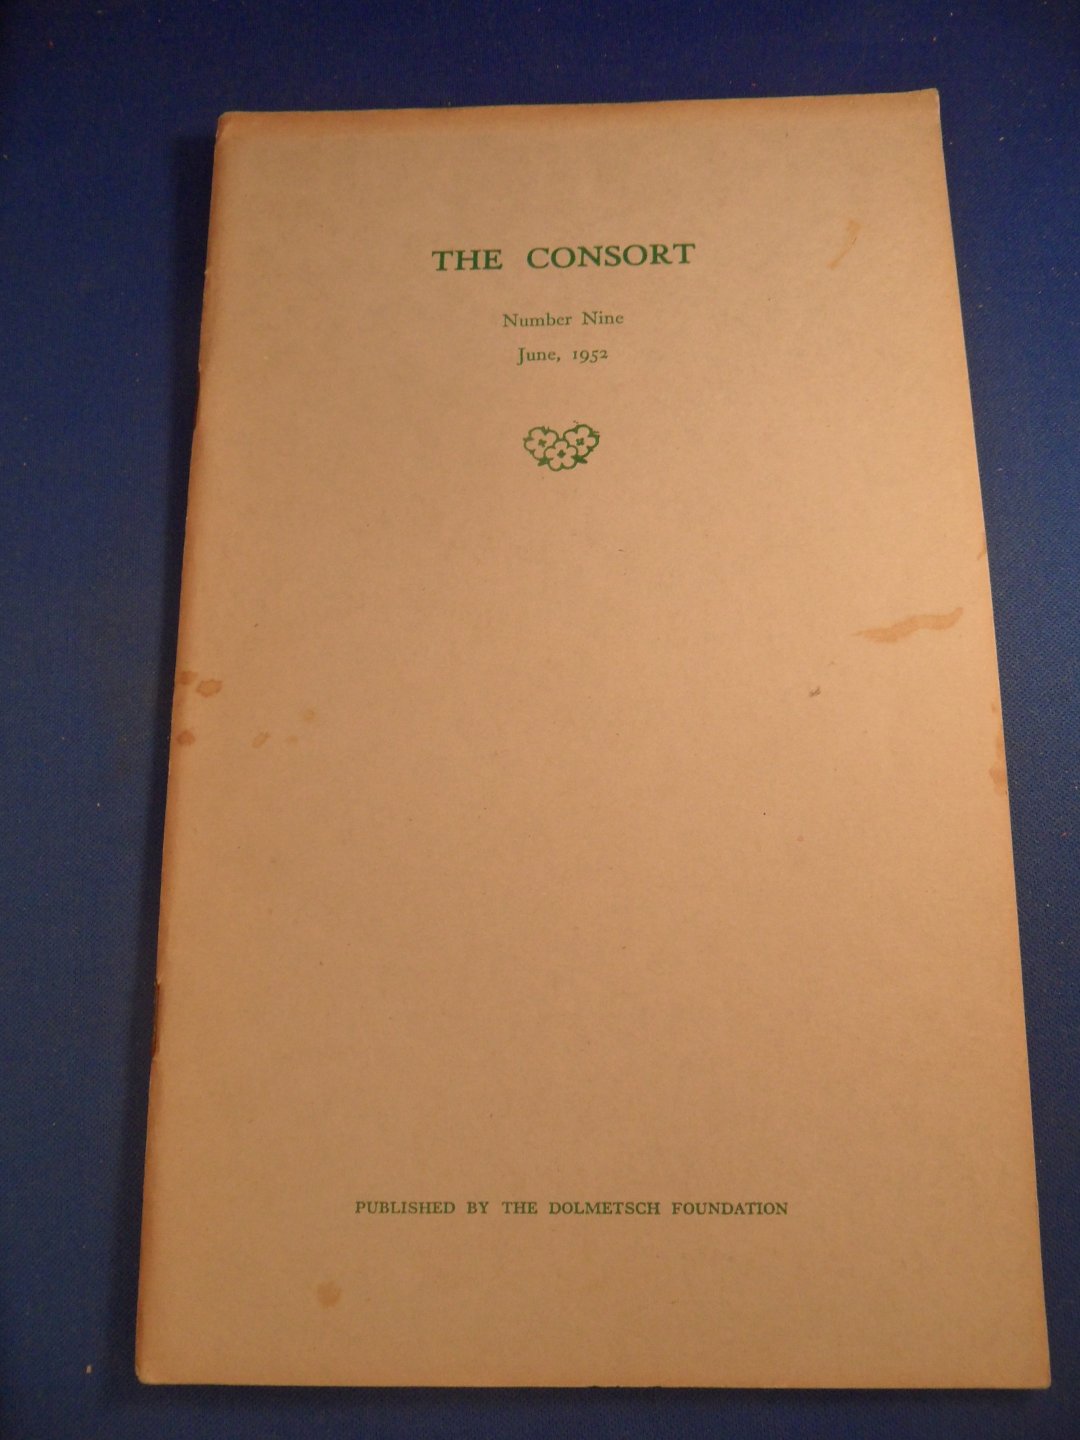 Dolmetsch foundation - The consort, no. 9 1952. Journal of the Dolmetsch foundation